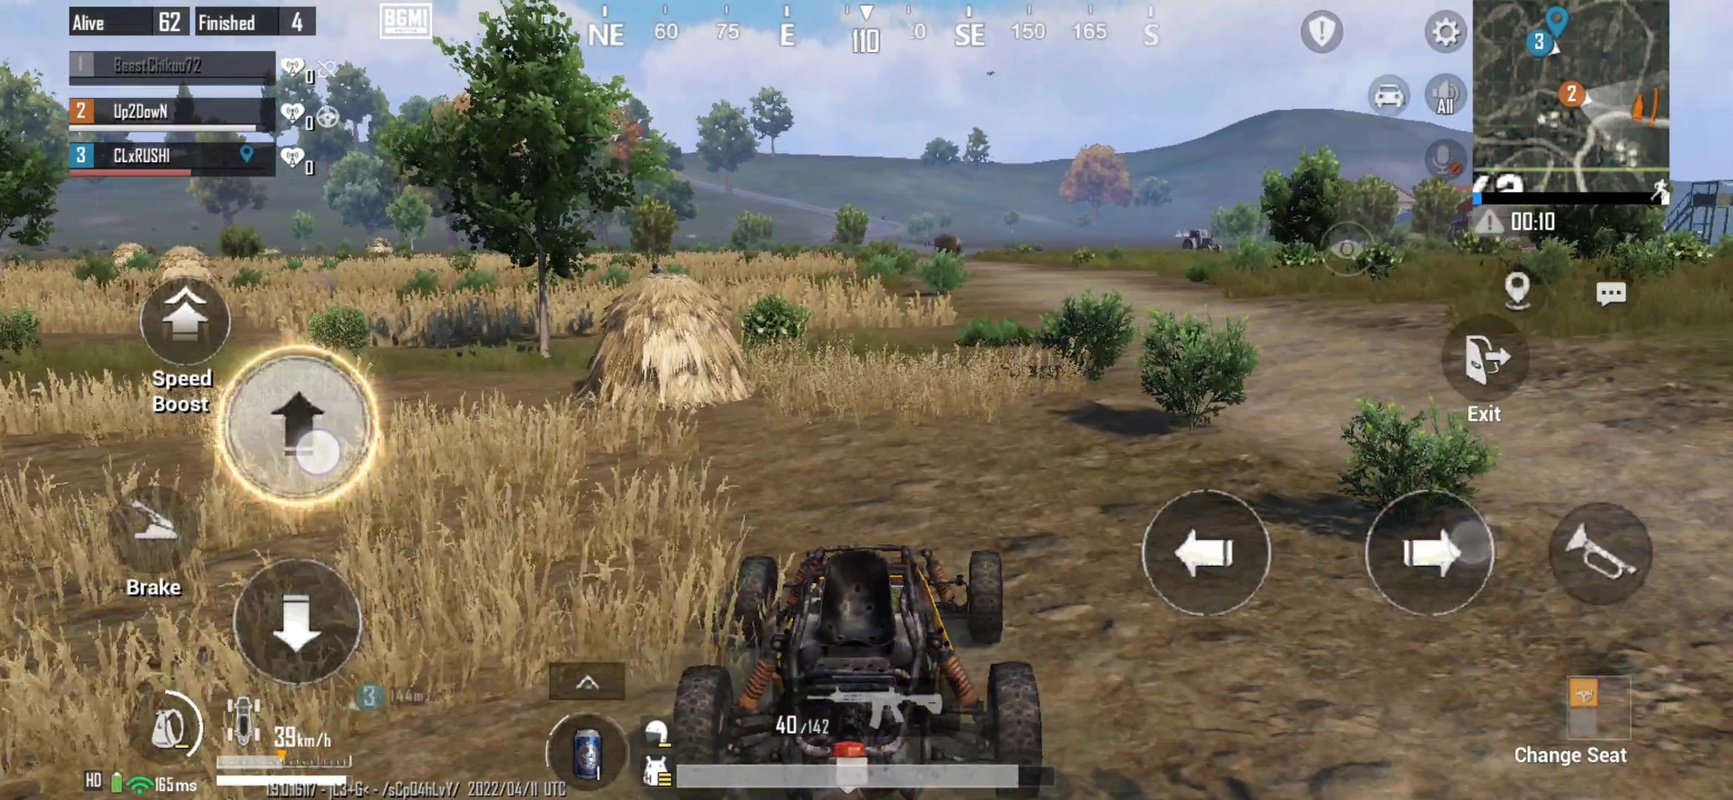 Battlegrounds Mobile India 2.9 APK for Android Screenshot 2